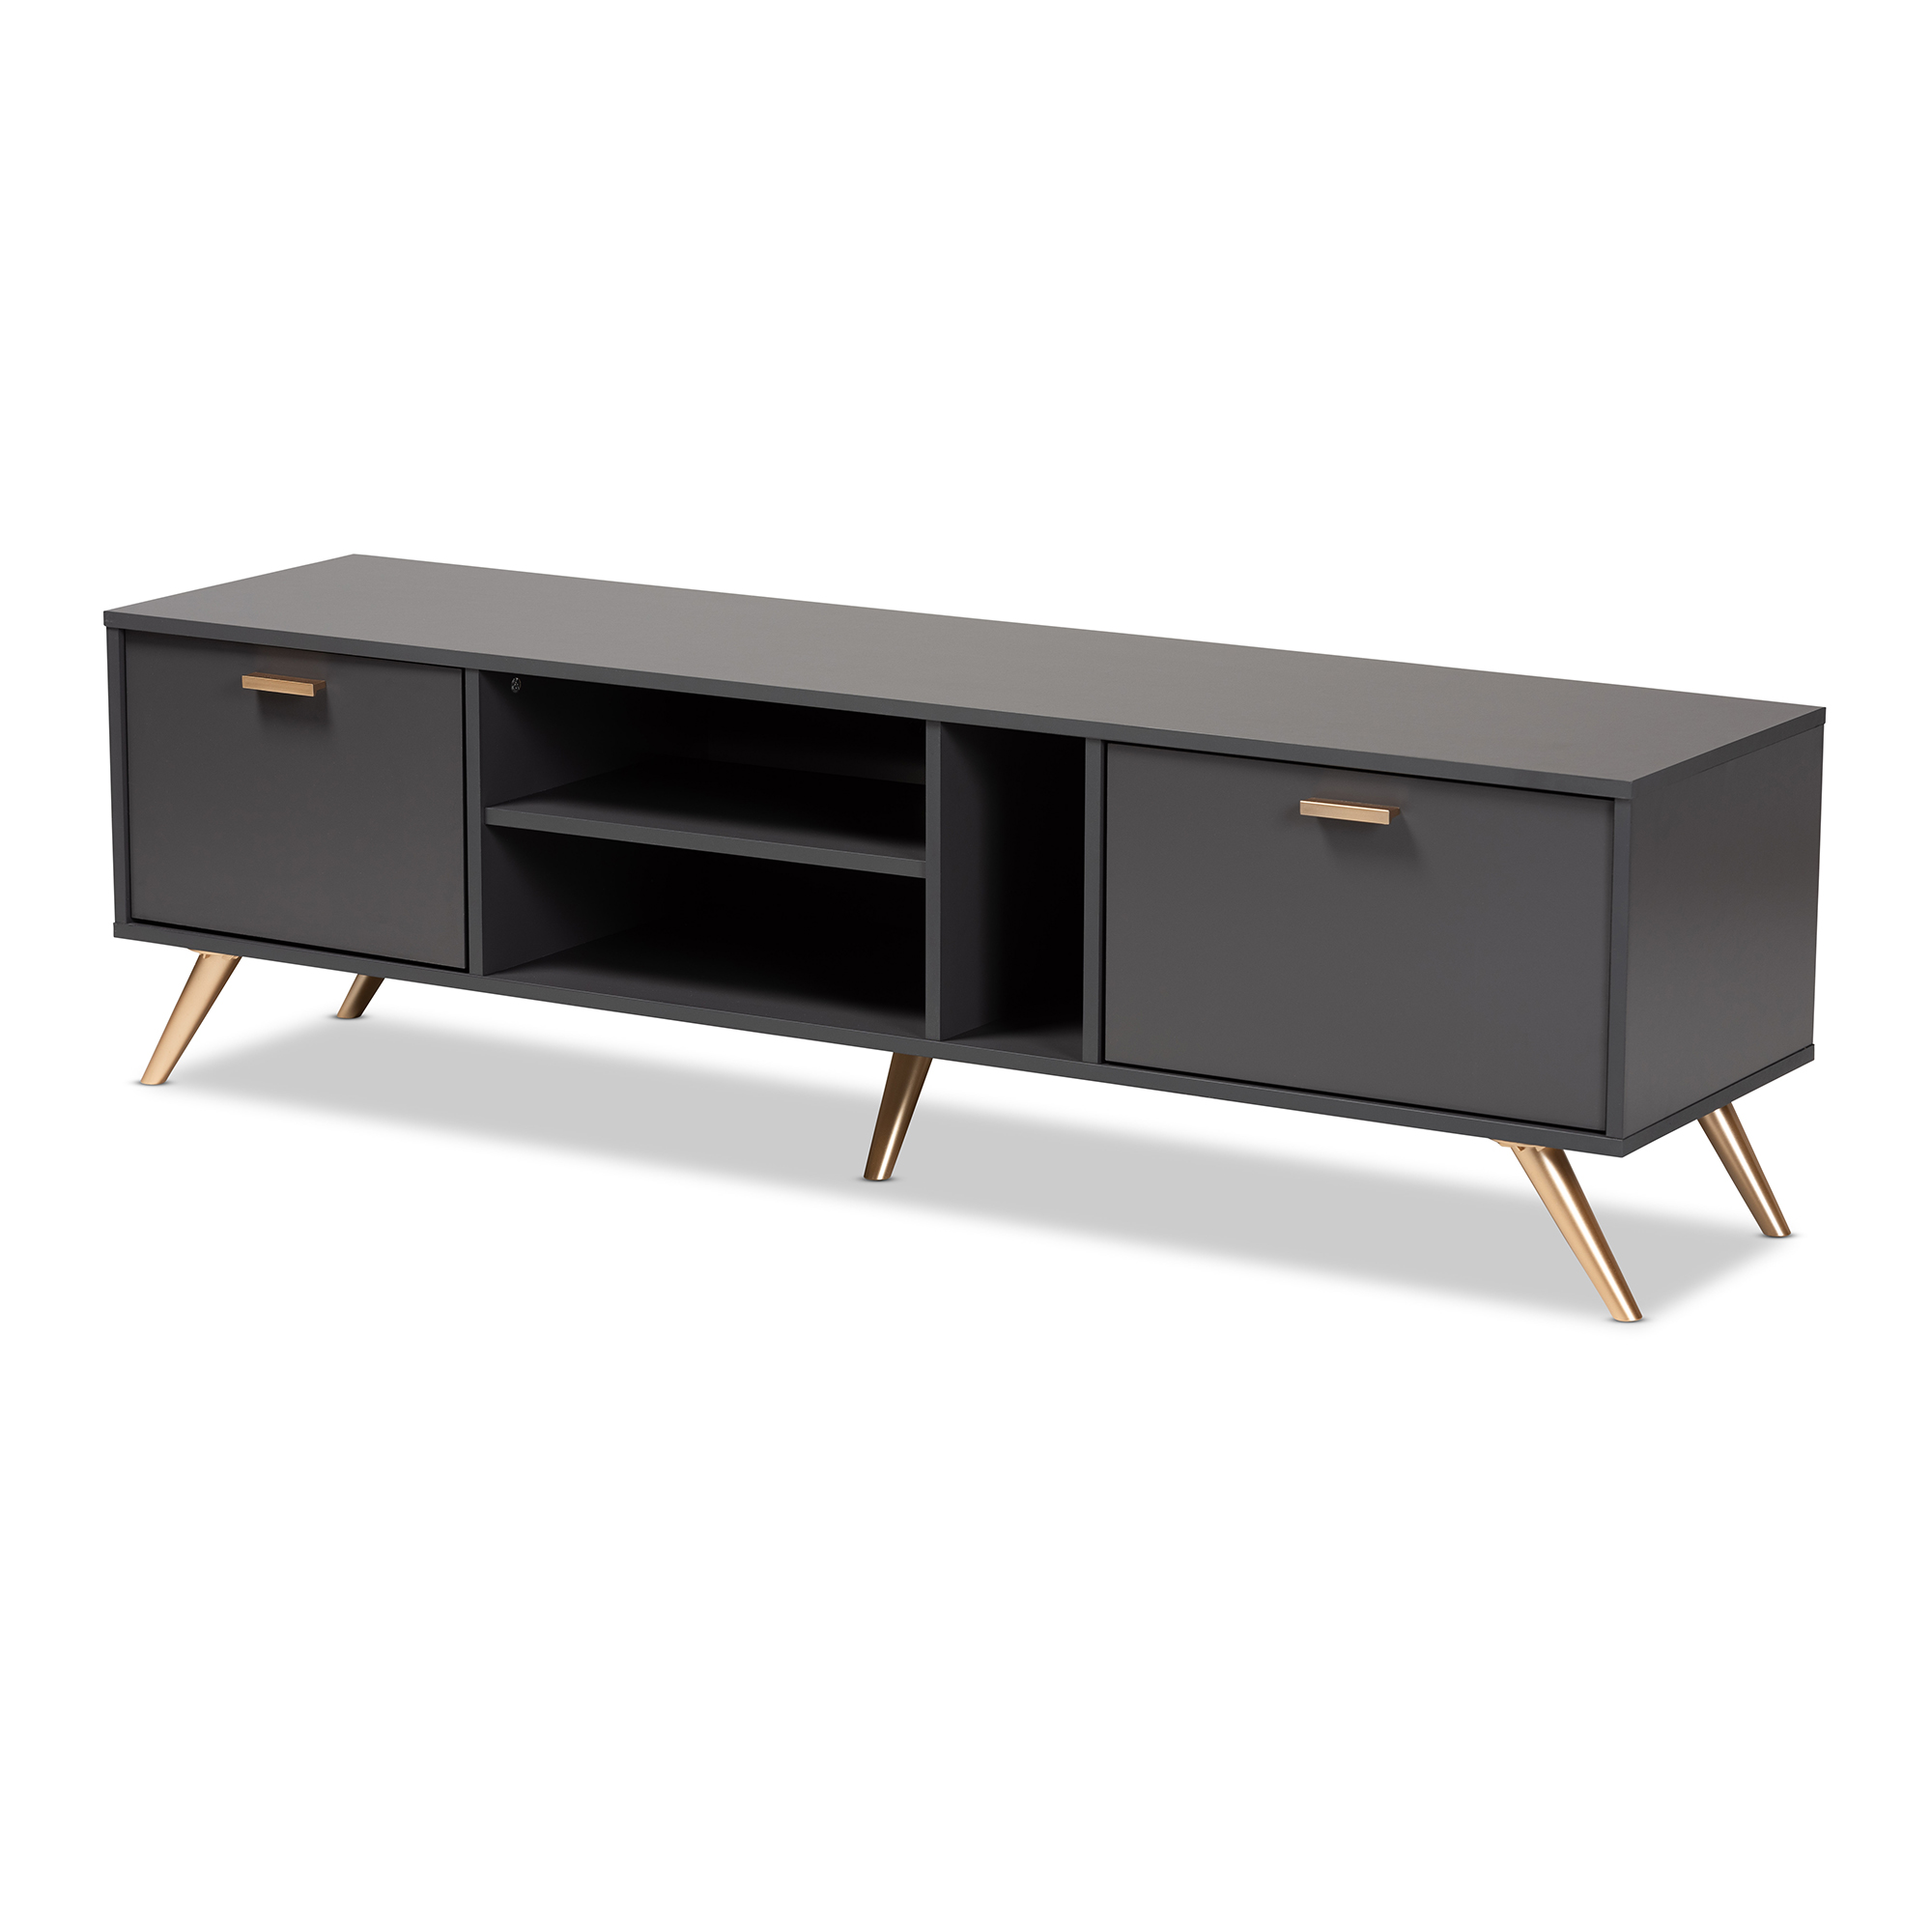 TV Cabinet Urban Chic Large Reclaimed Wood TV Stand IRF09C by Baumhaus